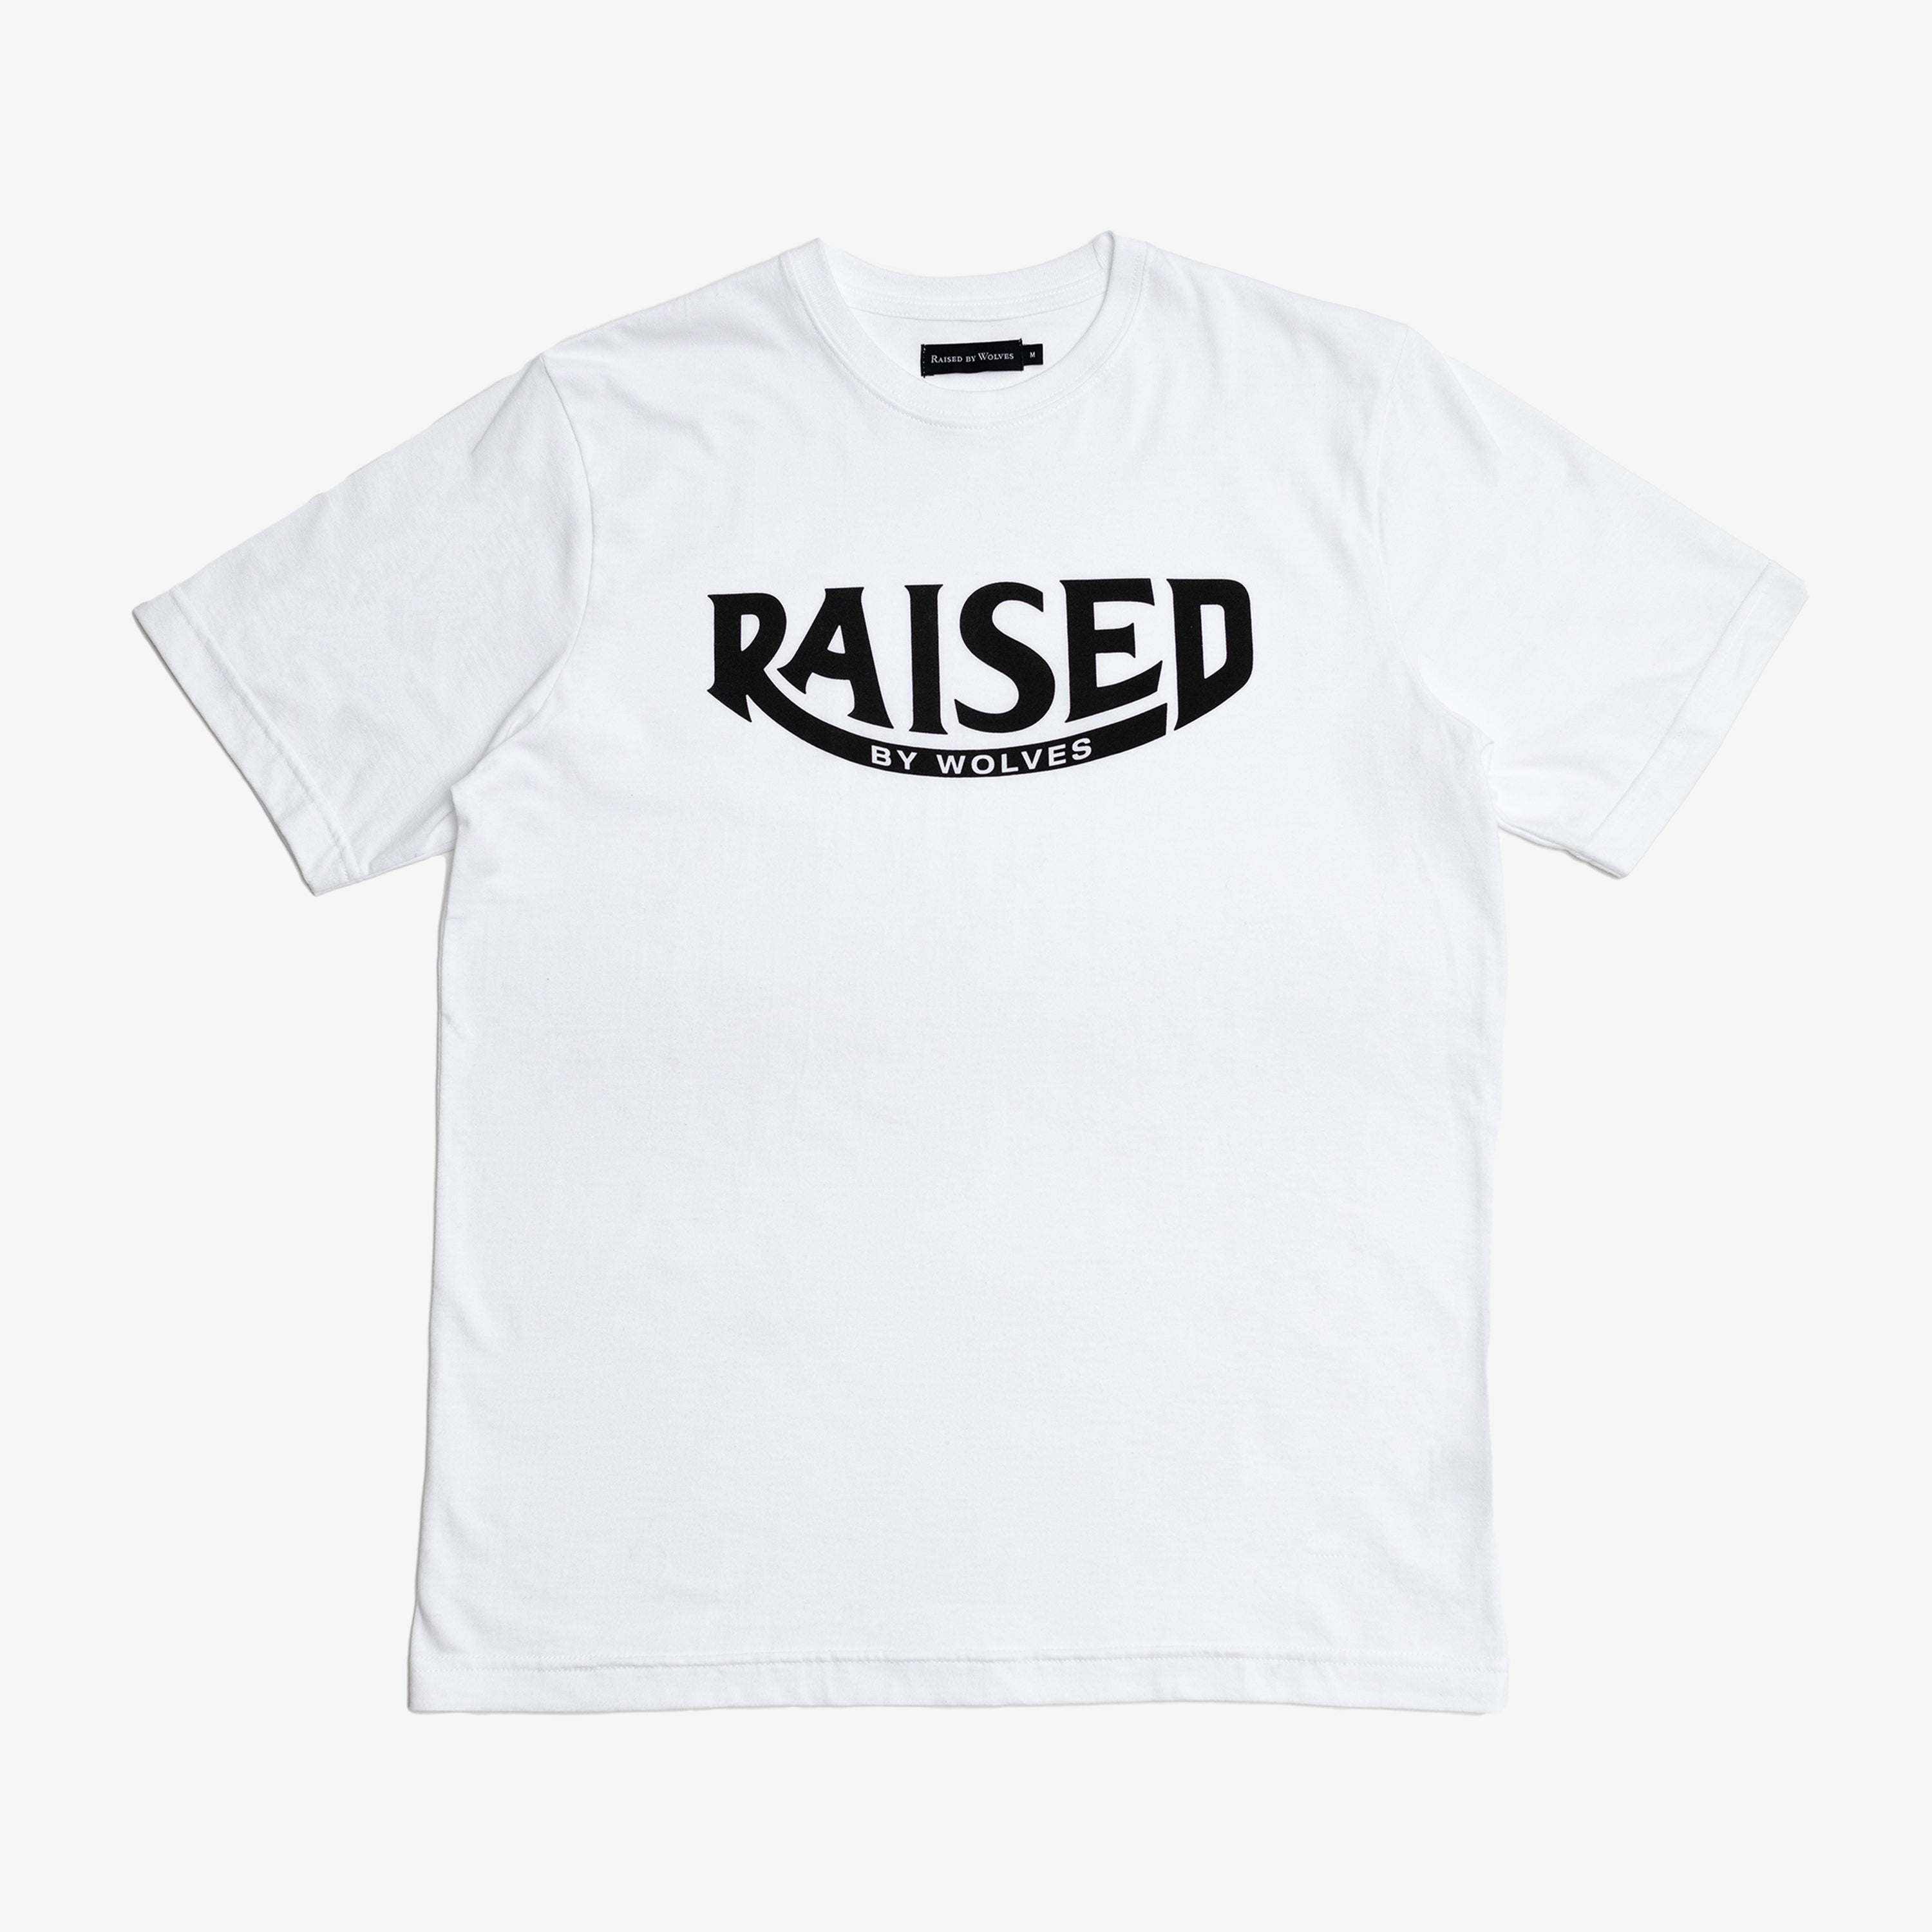 RBW Seeds of Rebellion Tee White